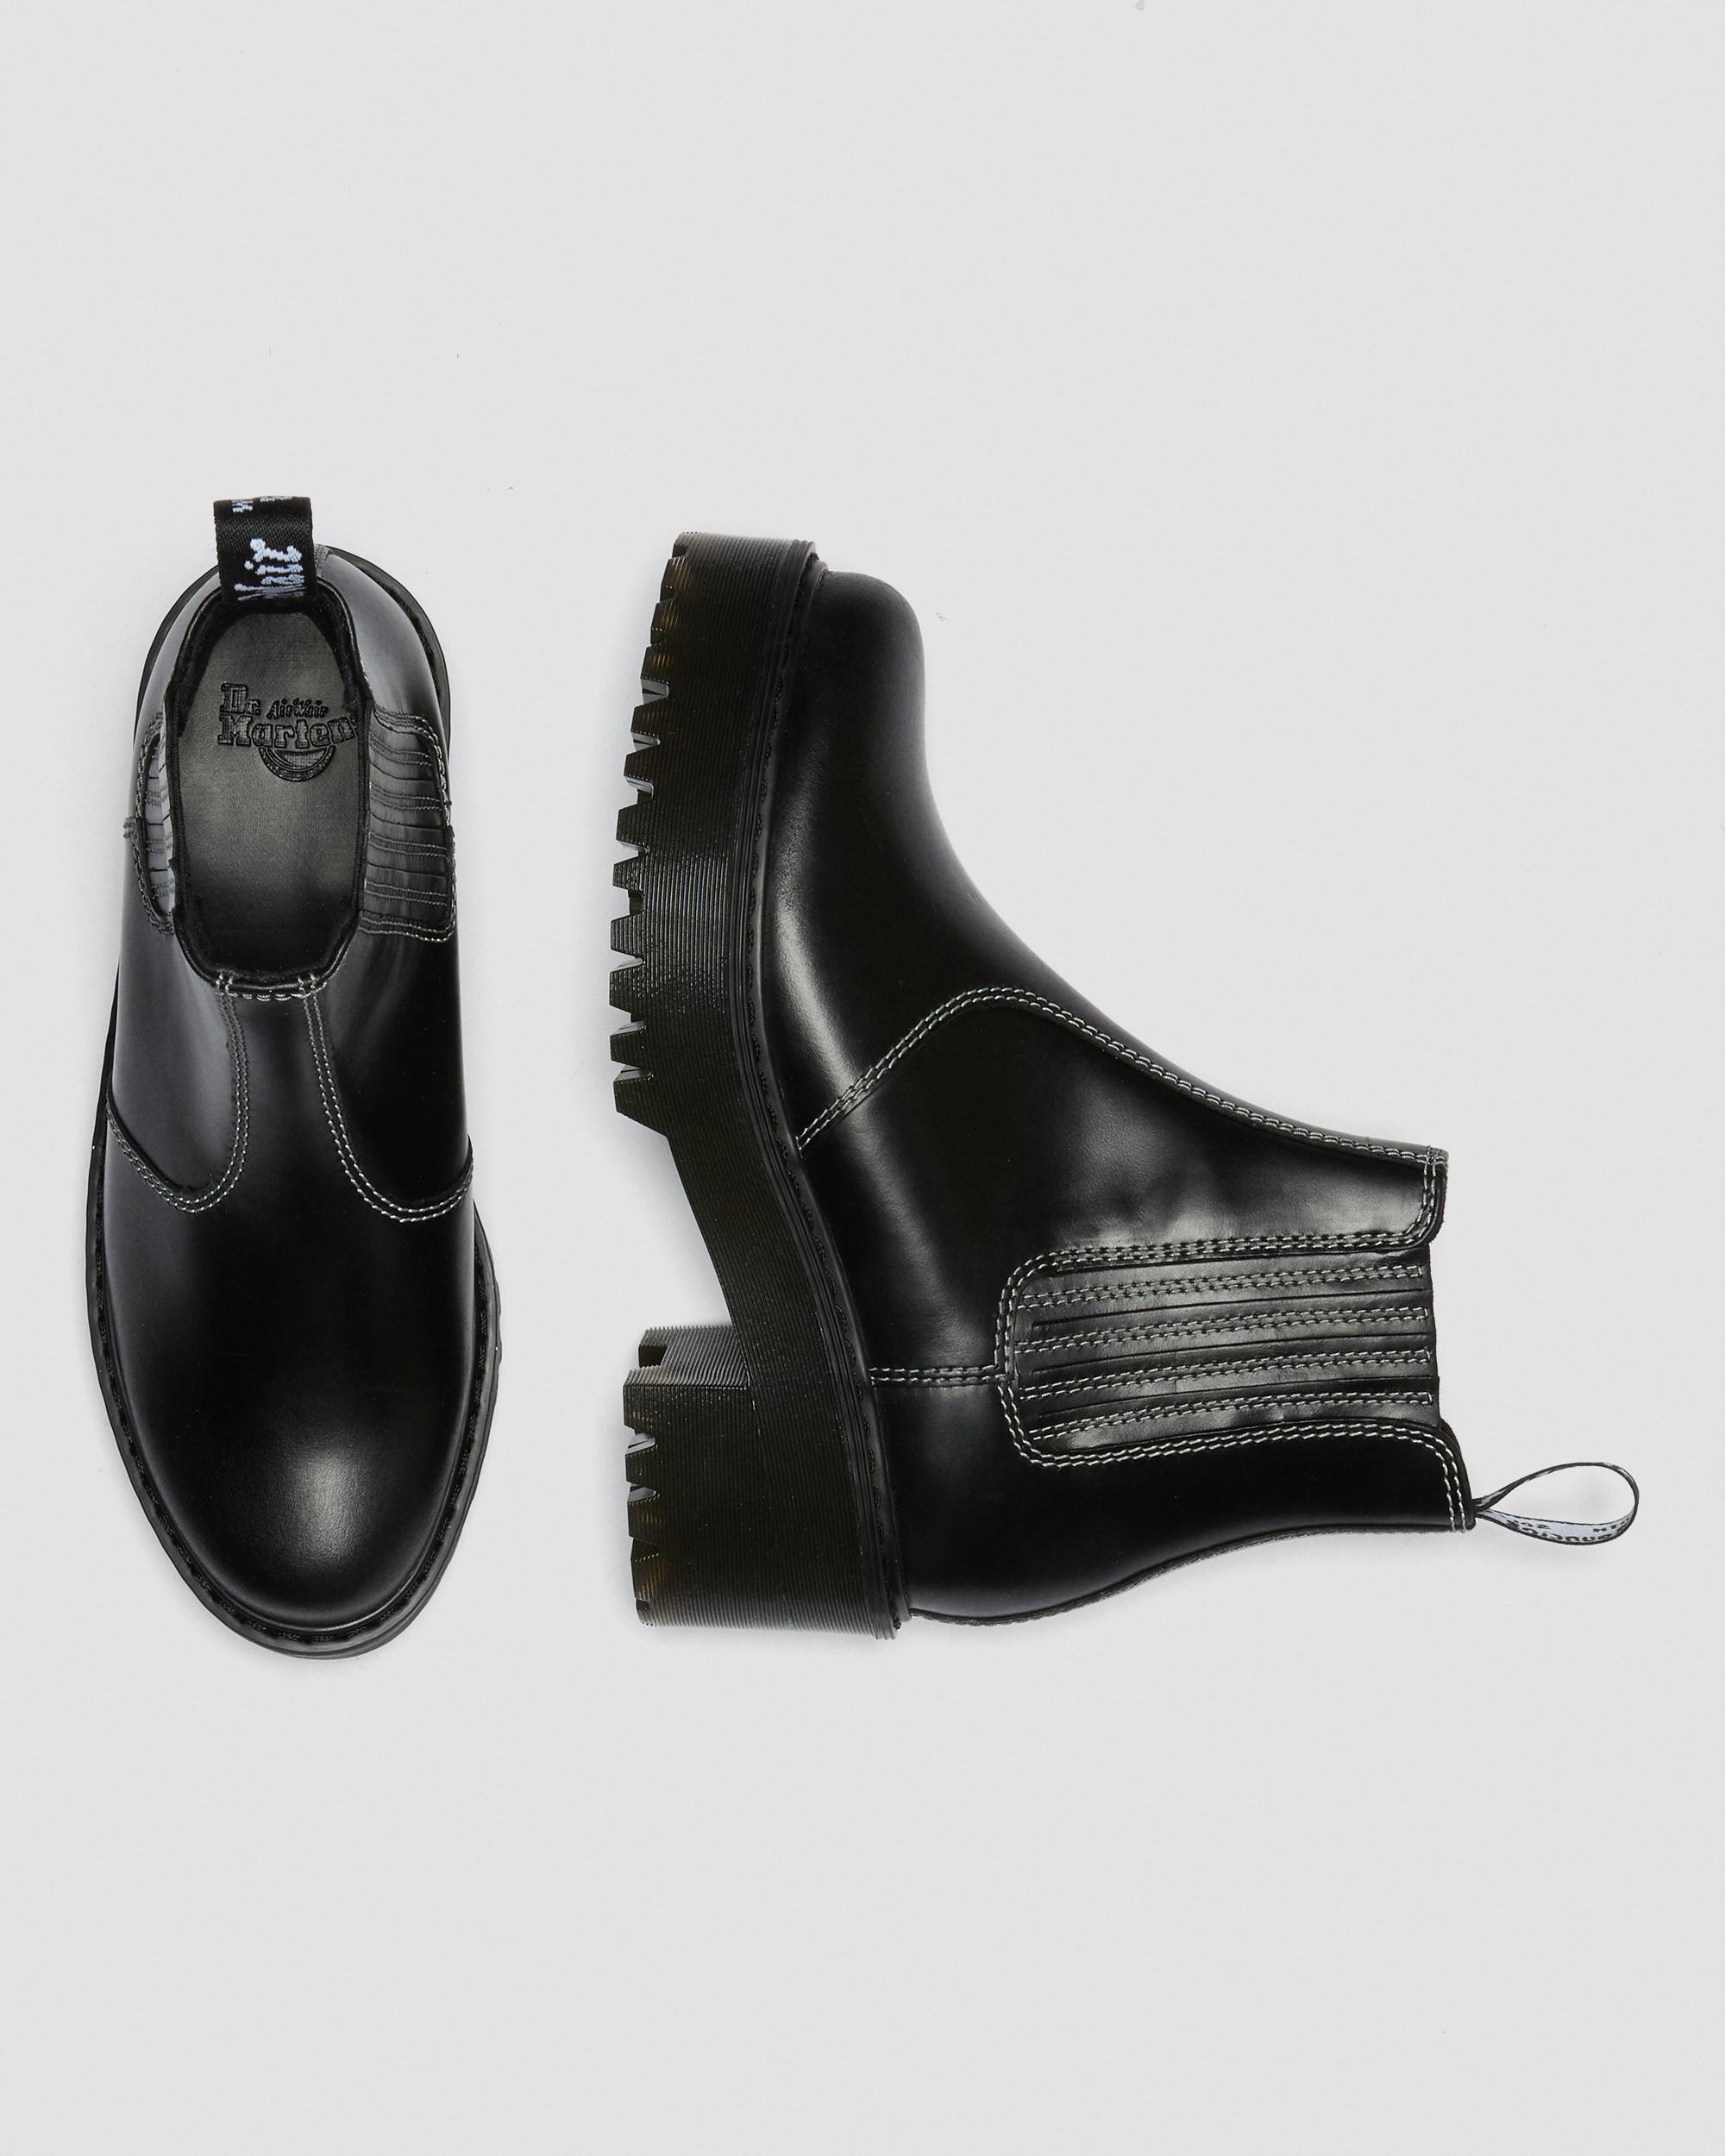 Ryg, ryg, ryg del absorberende Kong Lear Rometty Women's Leather Chelsea Boots in Black | Dr. Martens